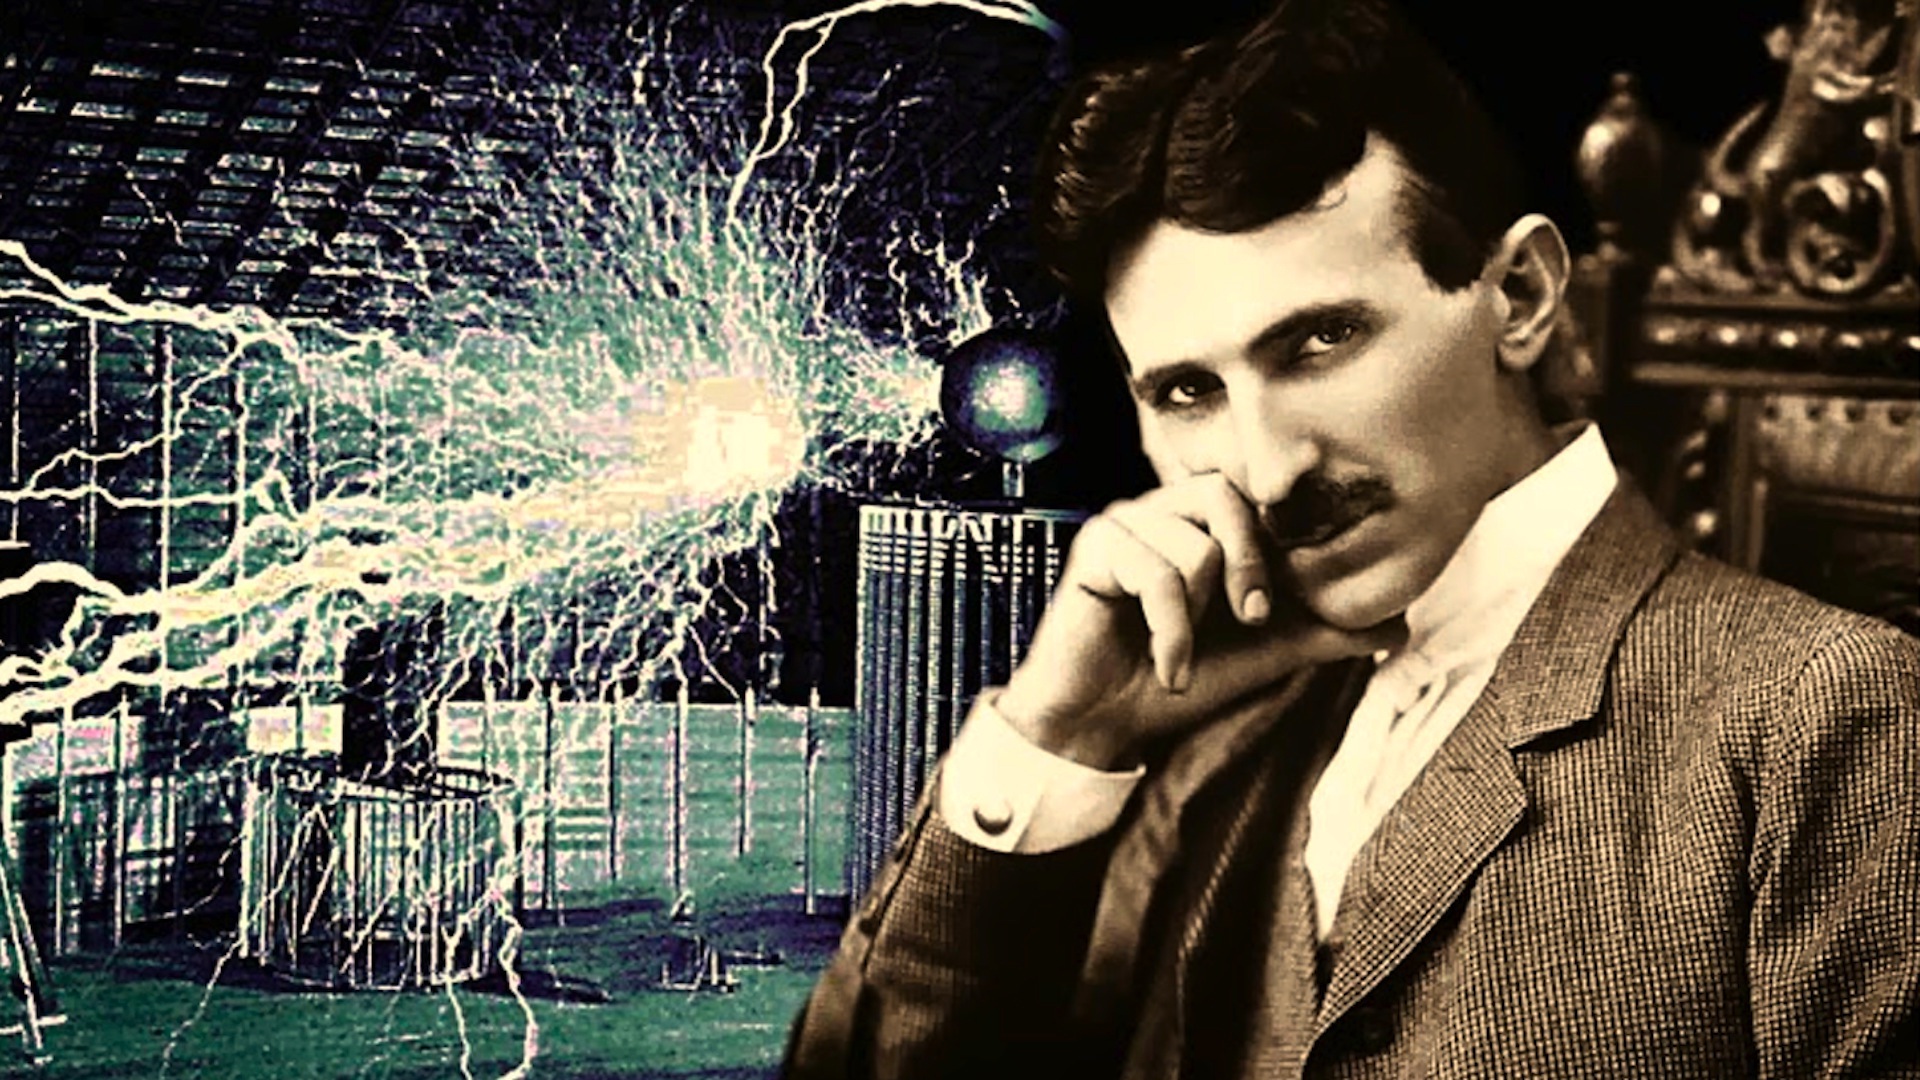 The Story of the great legend of Nikola tesla